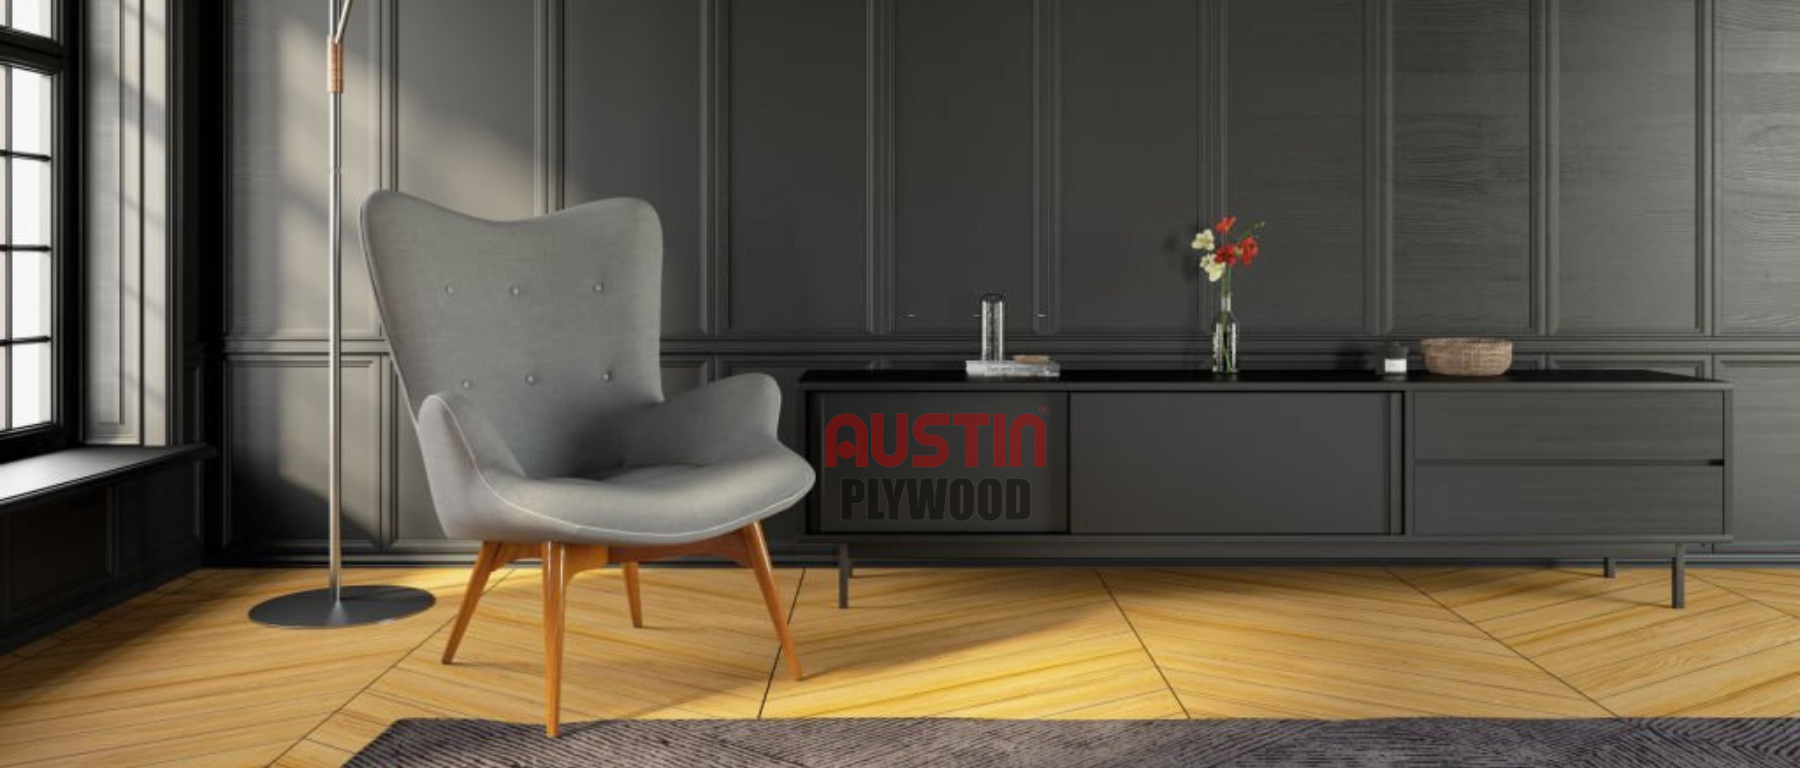 Using Plywood In Your Home Interior Best plywood for Furniture from Austin Plywood